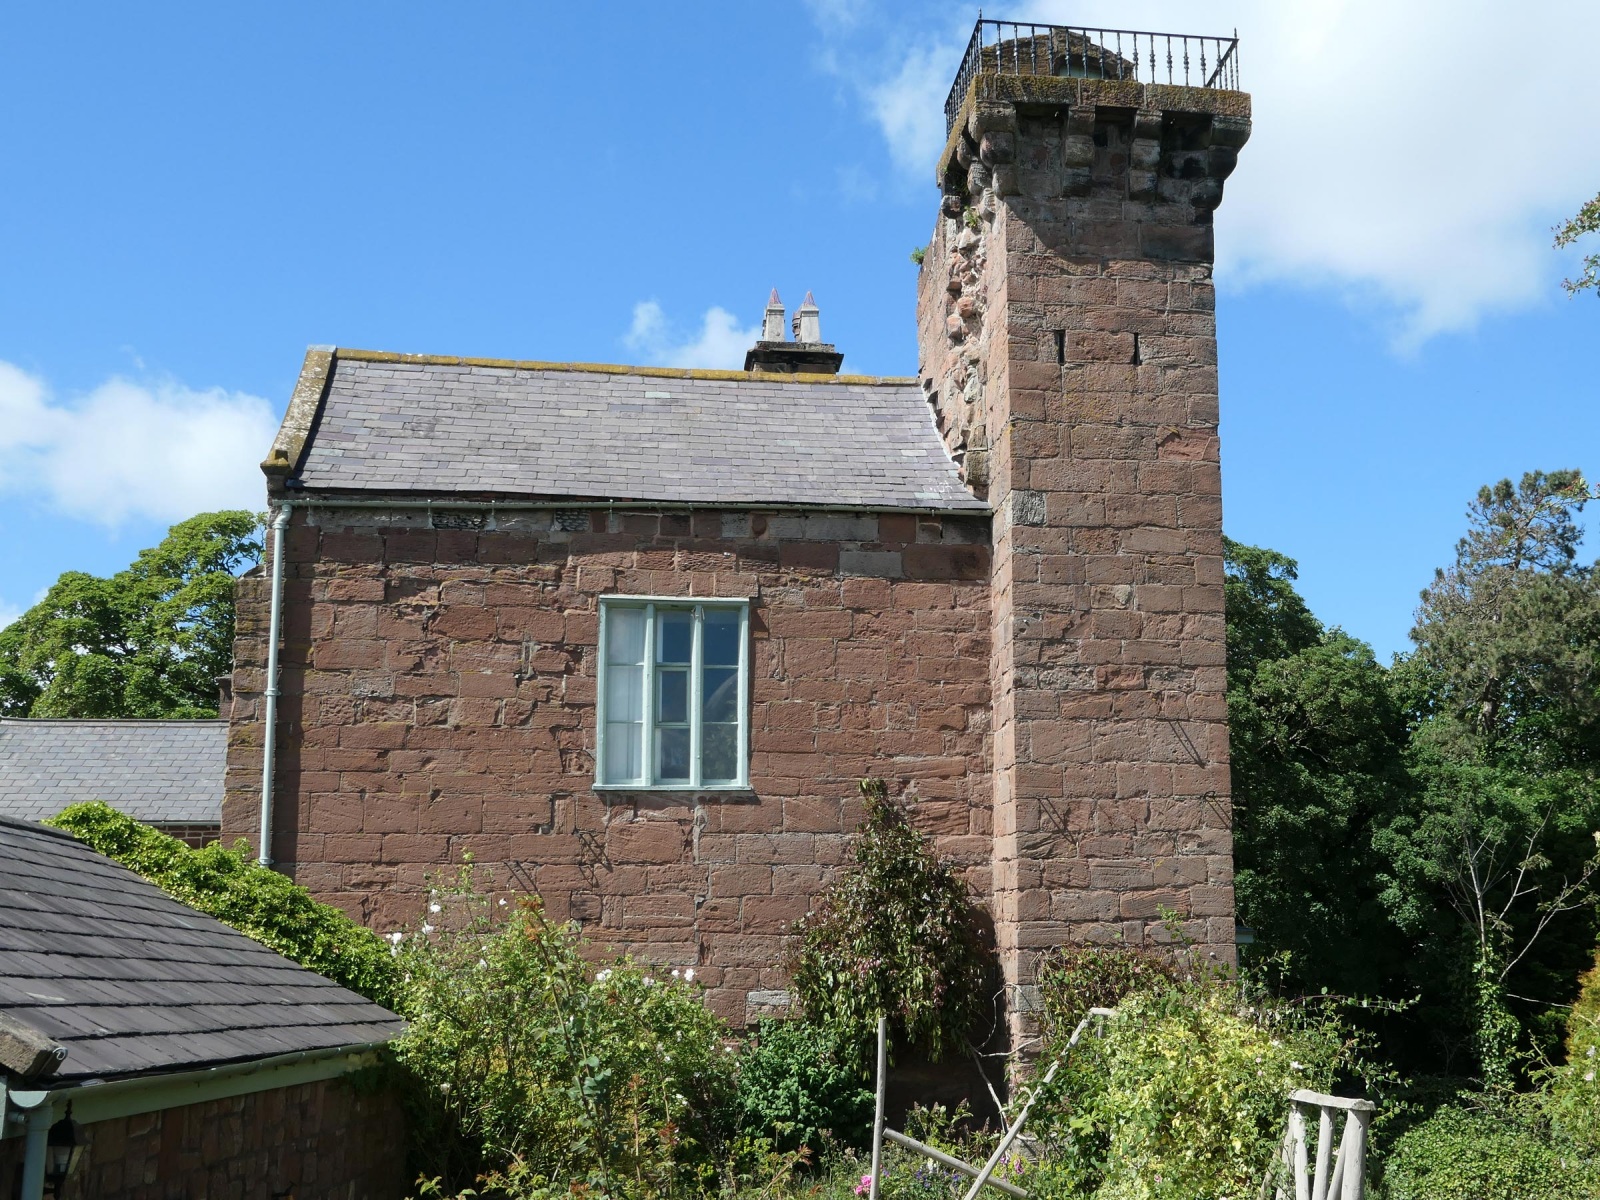 The tower at Brimstage Hall.